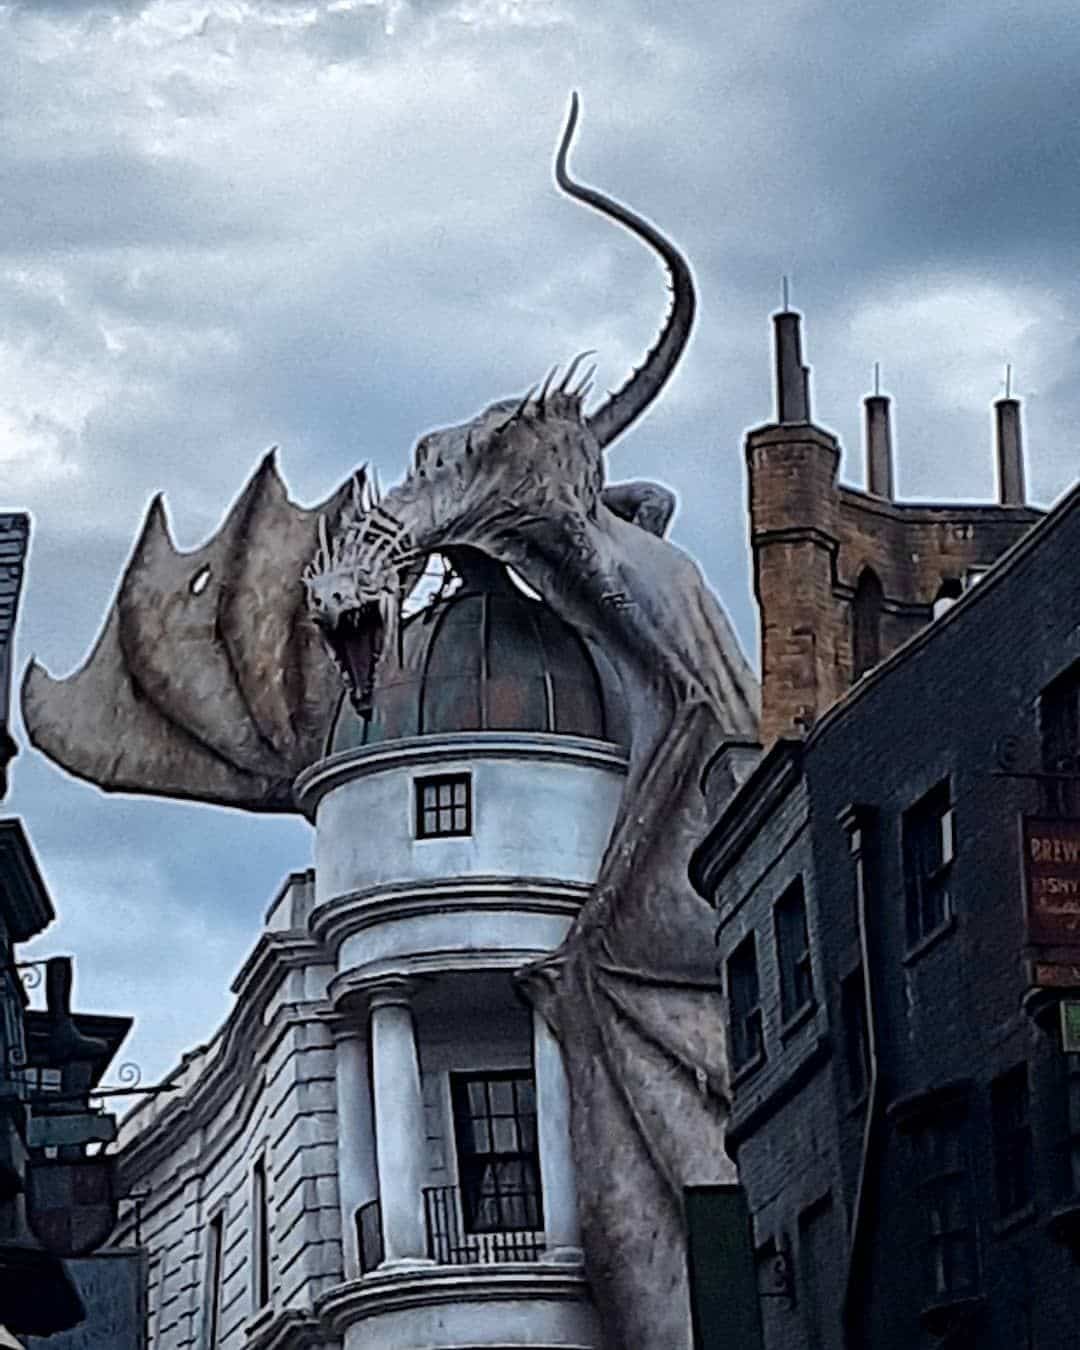 Harry Potter at islands of adventure and universal orlando. harrypotter ...